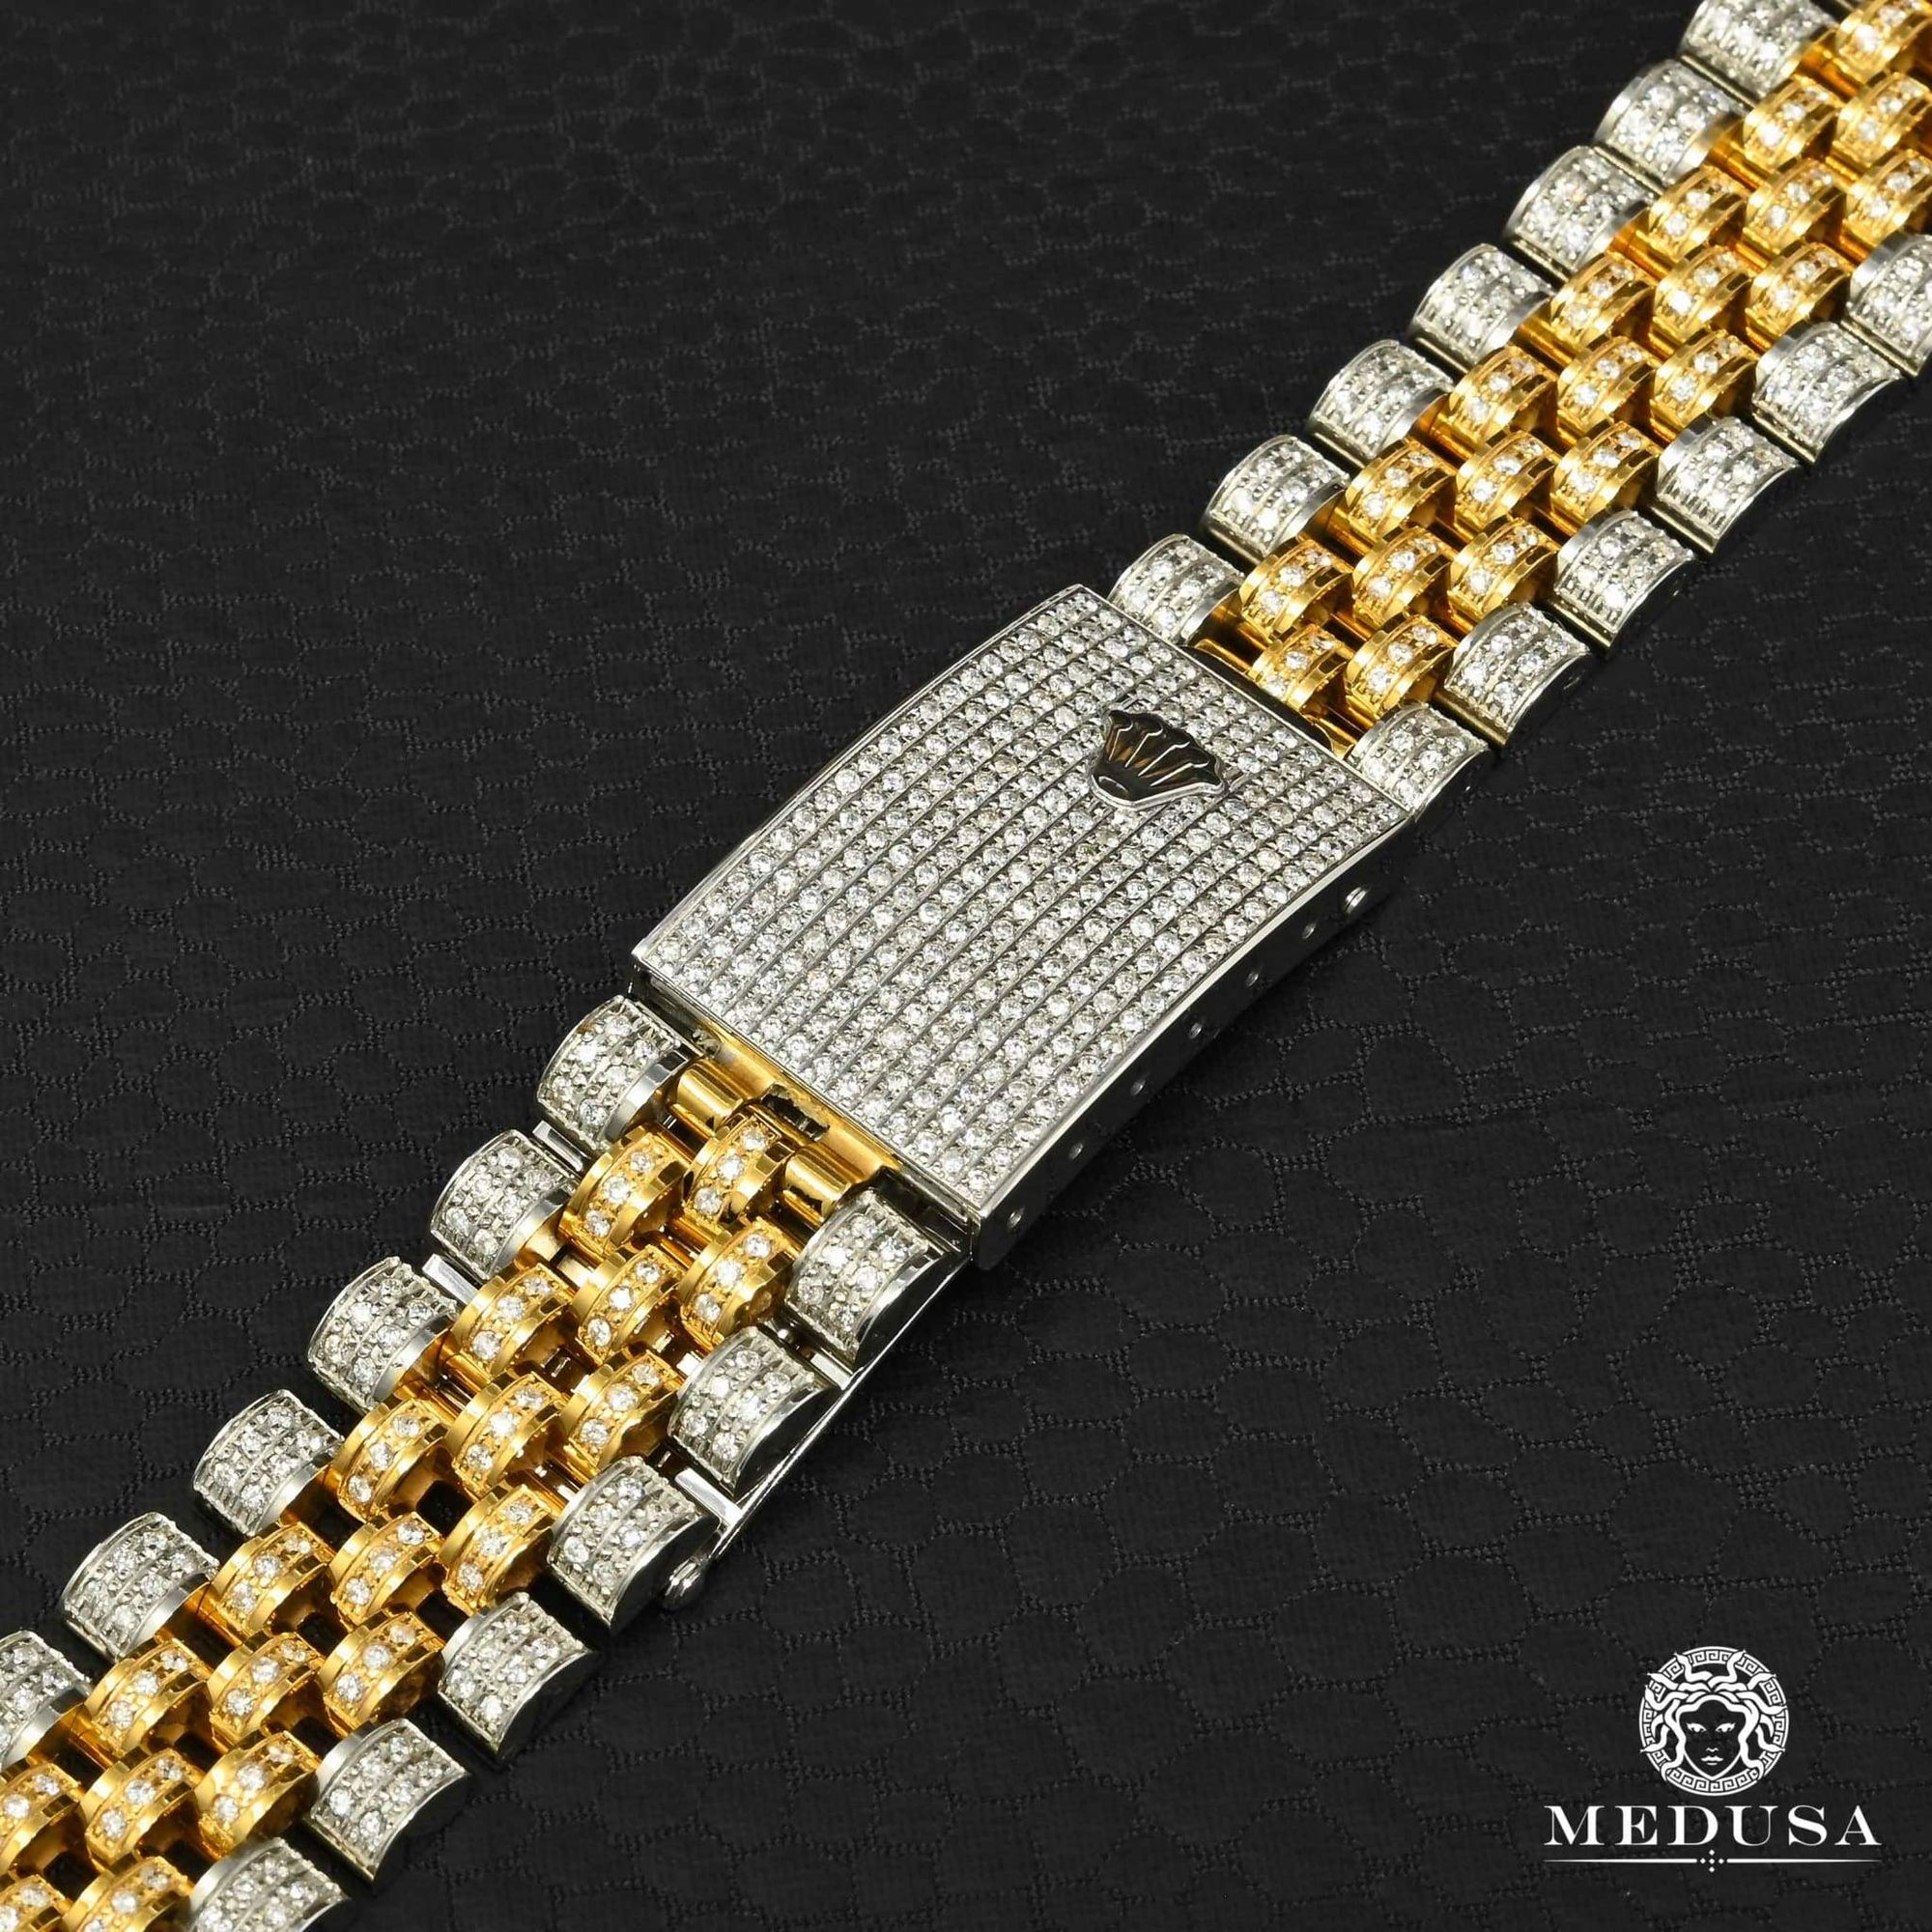 Montre Rolex | Homme Bracelet Jubilee - Iced Out 2 Tones Or Tons